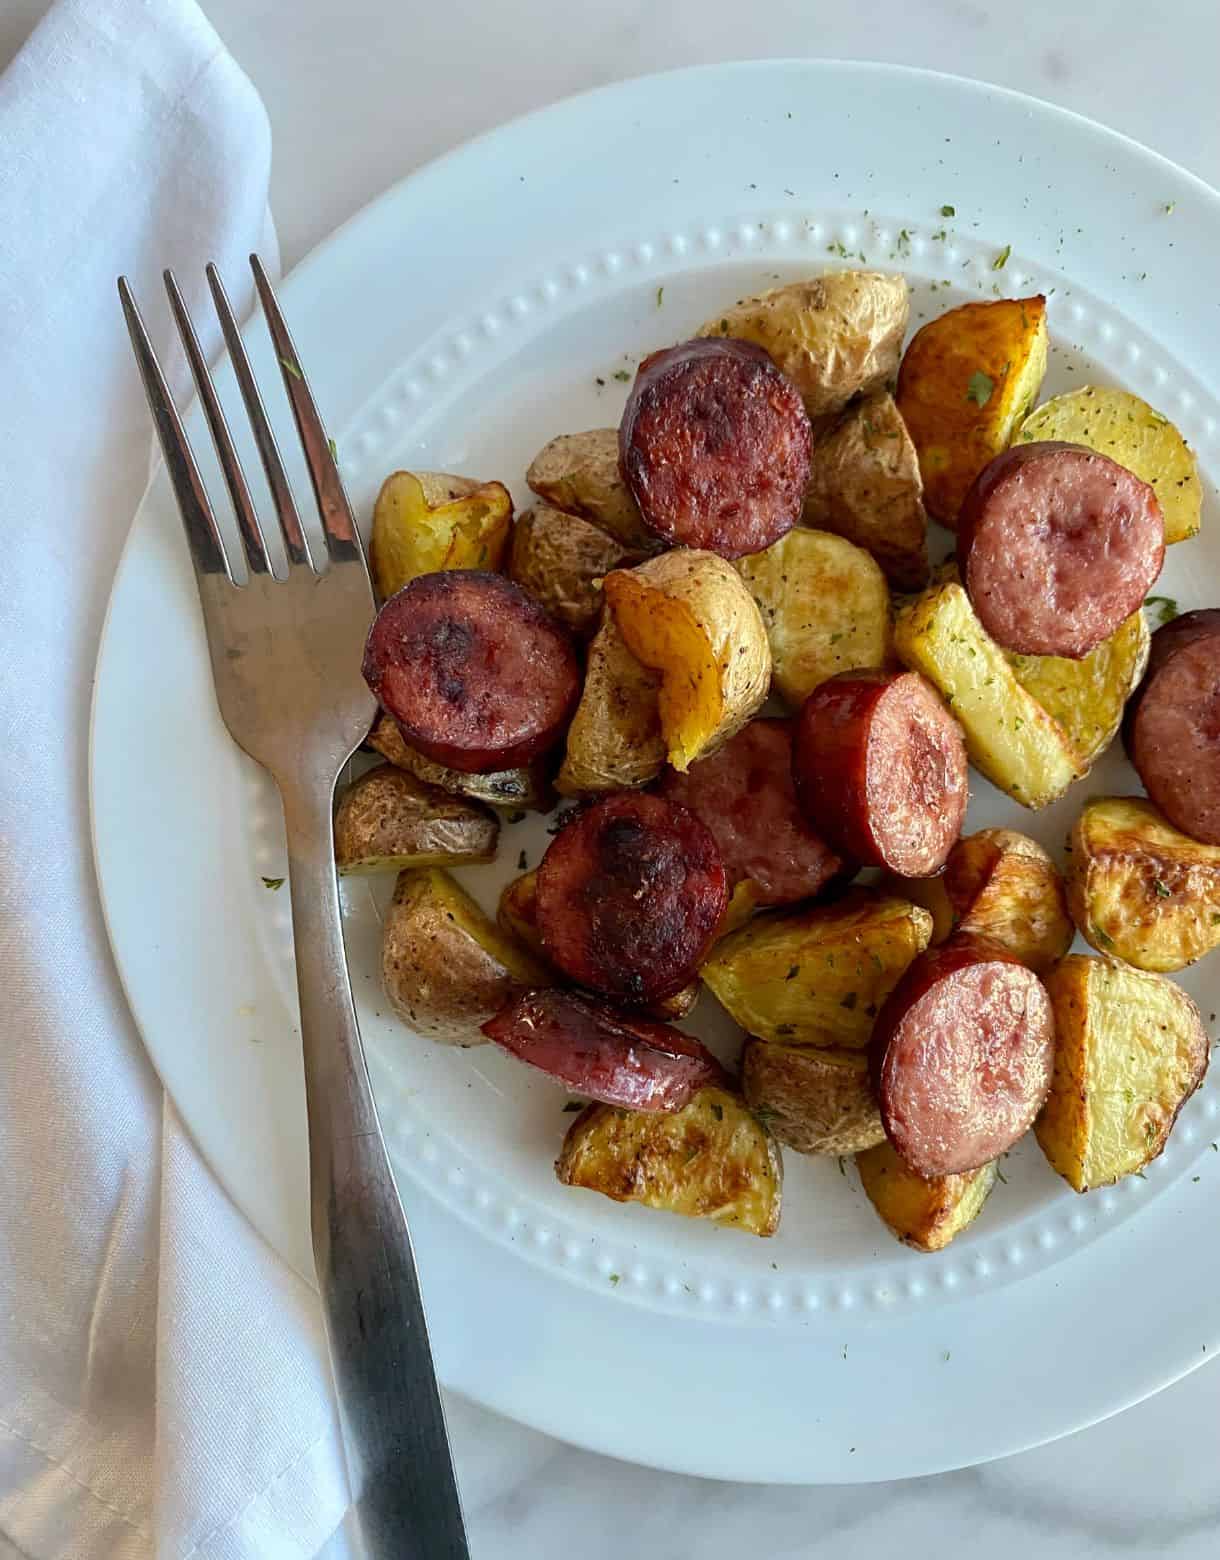 A plate of oven roasted smoked sausage and potatoes.